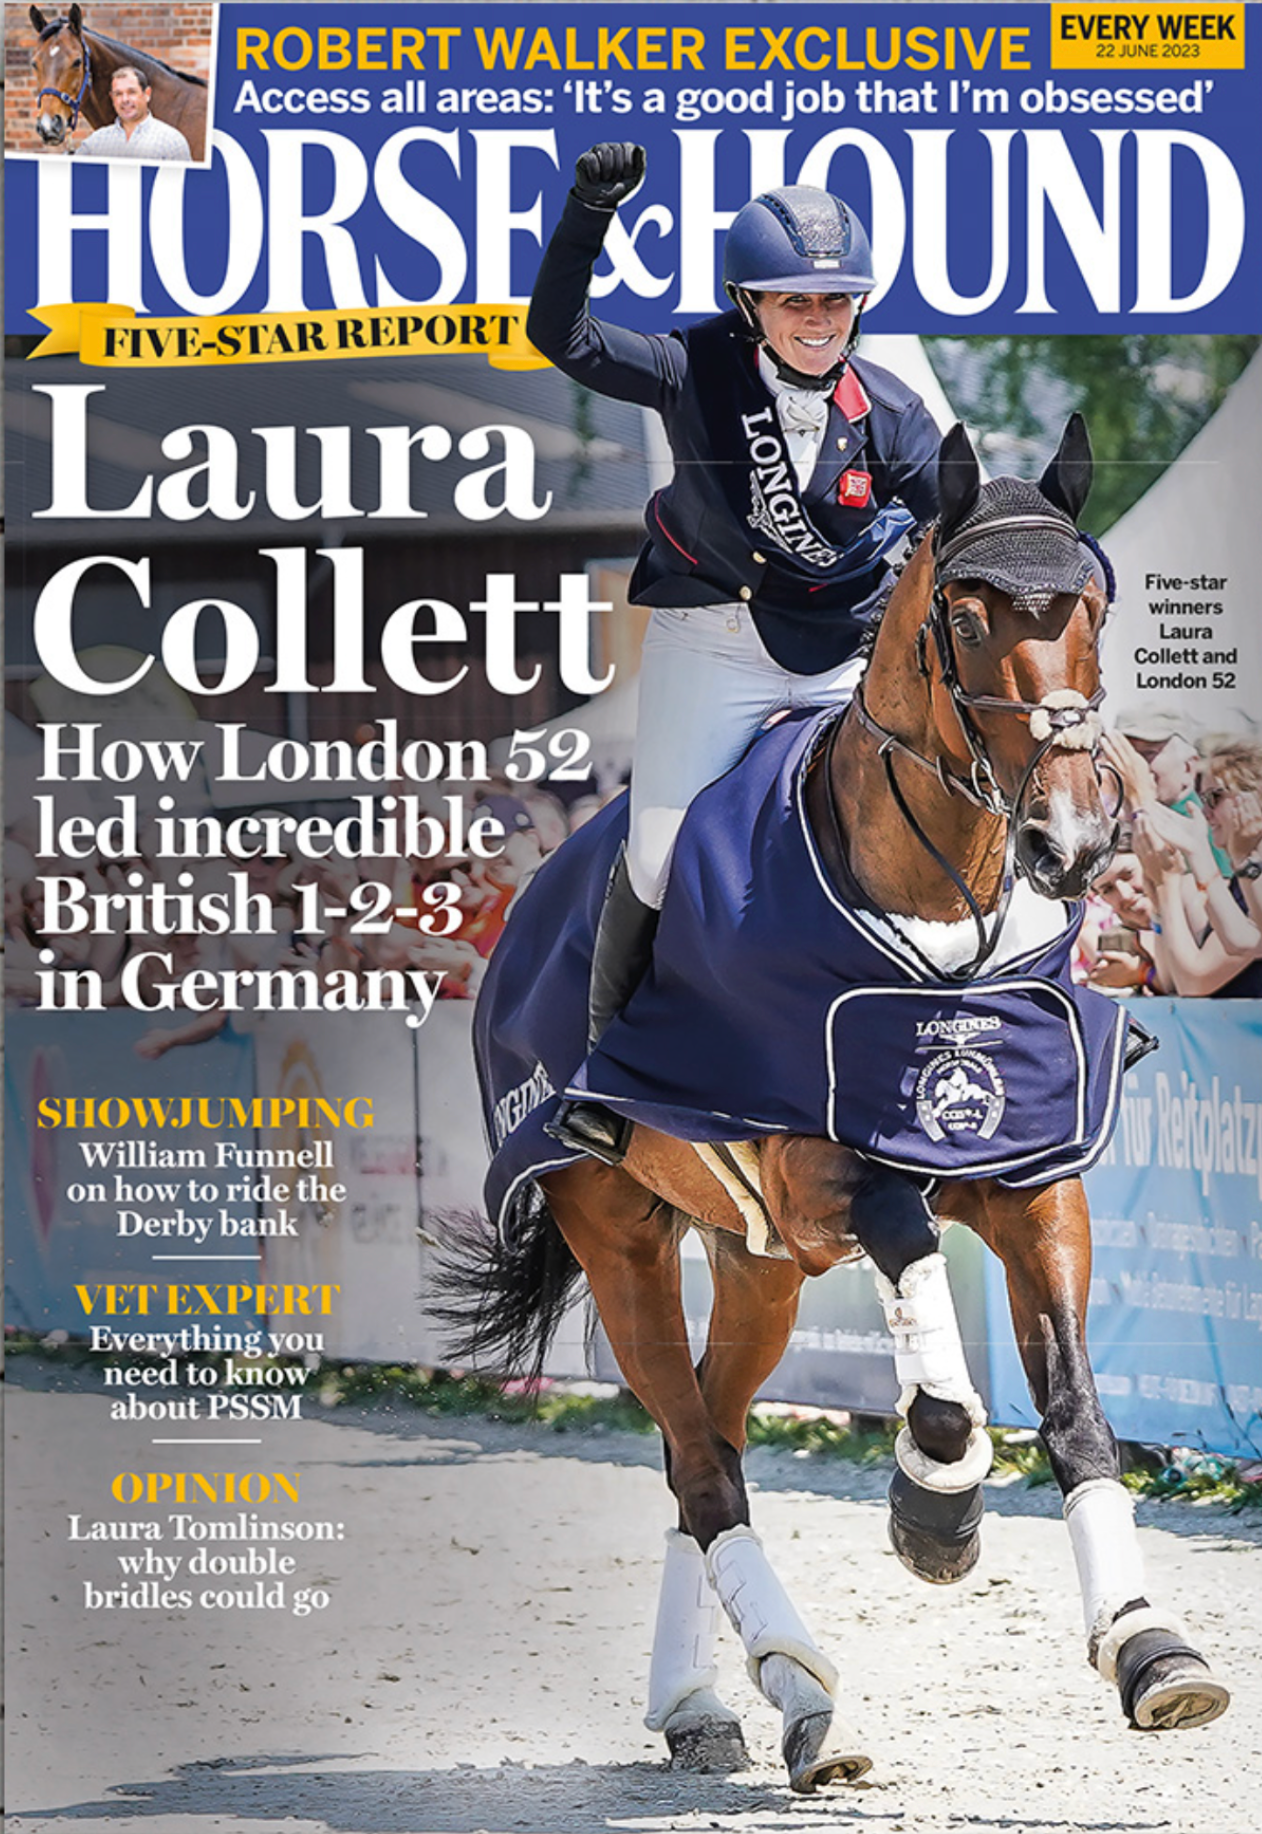 HC on the Horse & Hound Cover!